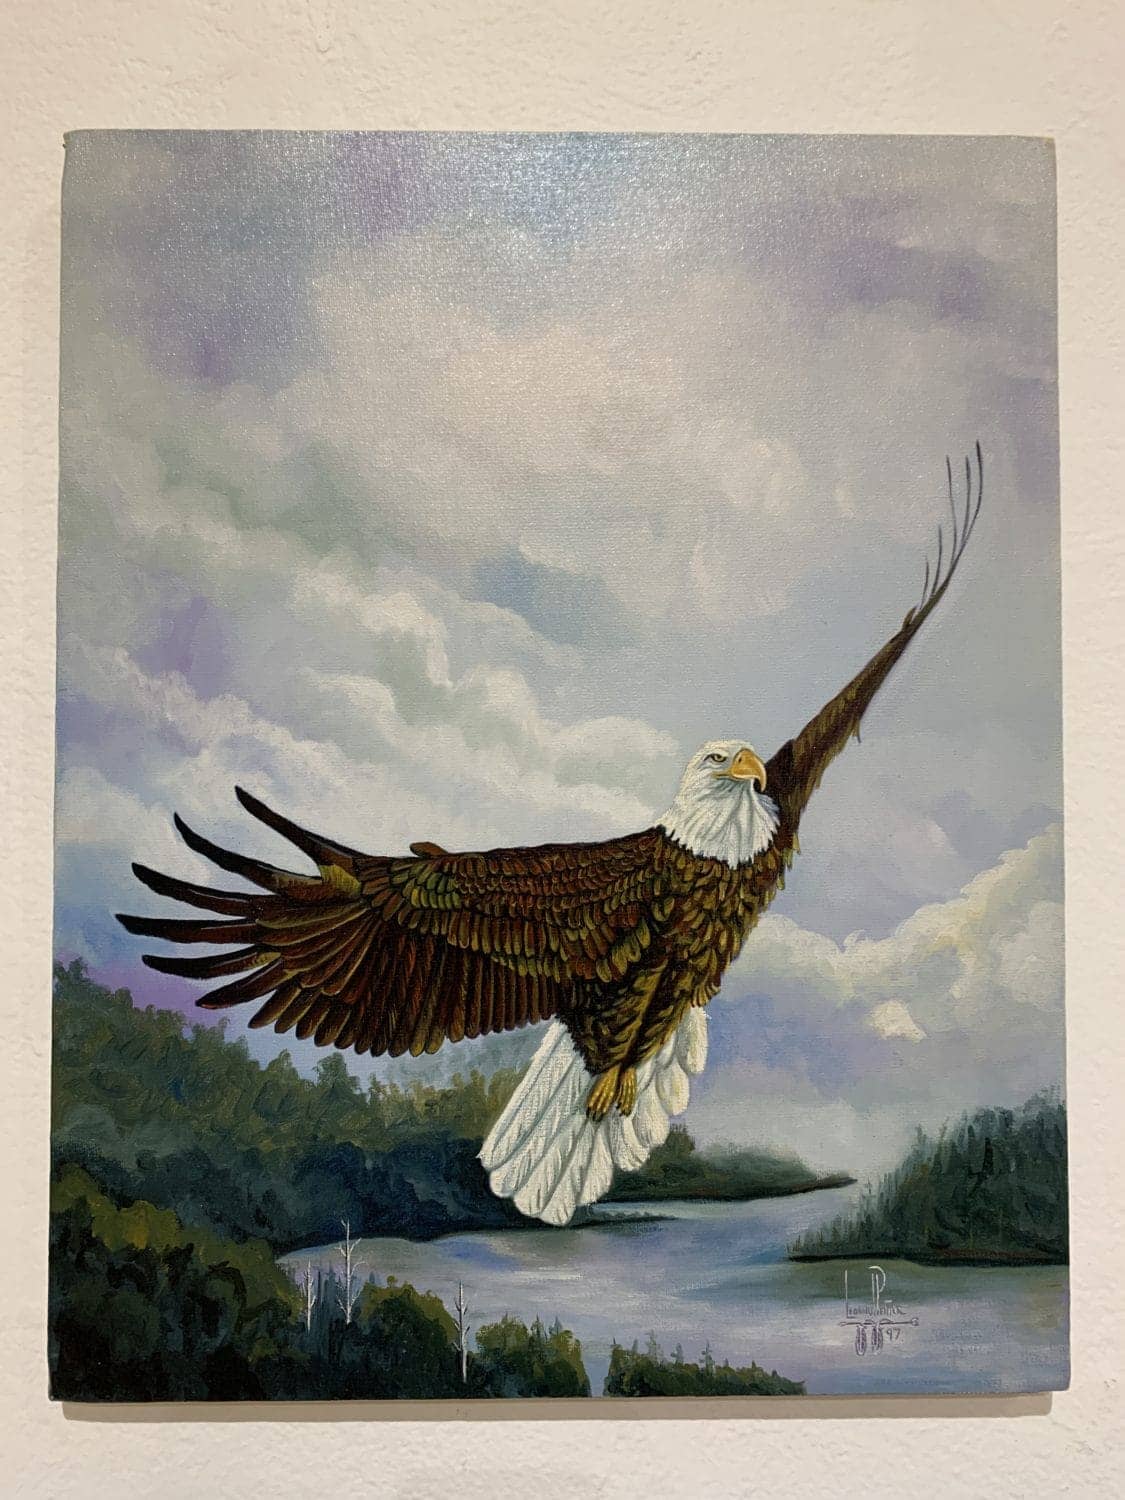 Eagle-Rising-art-by-Leonard-Peltier-on-exhibit-at-Richmond-Art-Center, Leonard Peltier is one of America’s longest-serving Political Prisoners, and Biden may be his last hope, Abolition Now! 